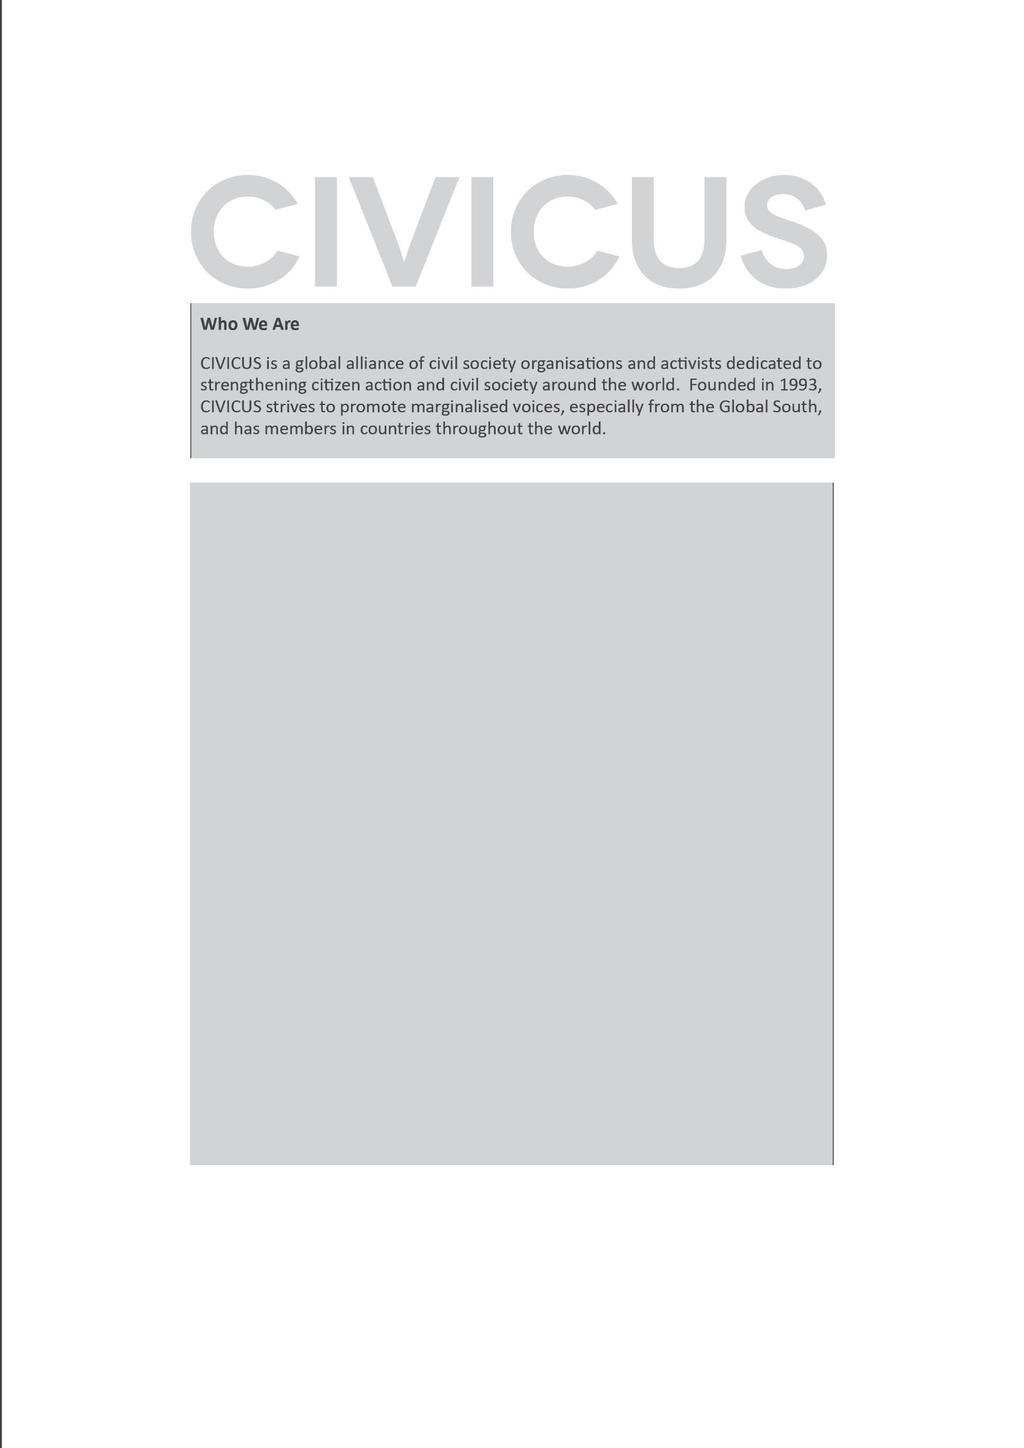 Edited by Andrew Firmin, Editor, Policy and Research, CIVICUS Written and researched by David Kode, Senior Policy and Research Officer, CIVICUS